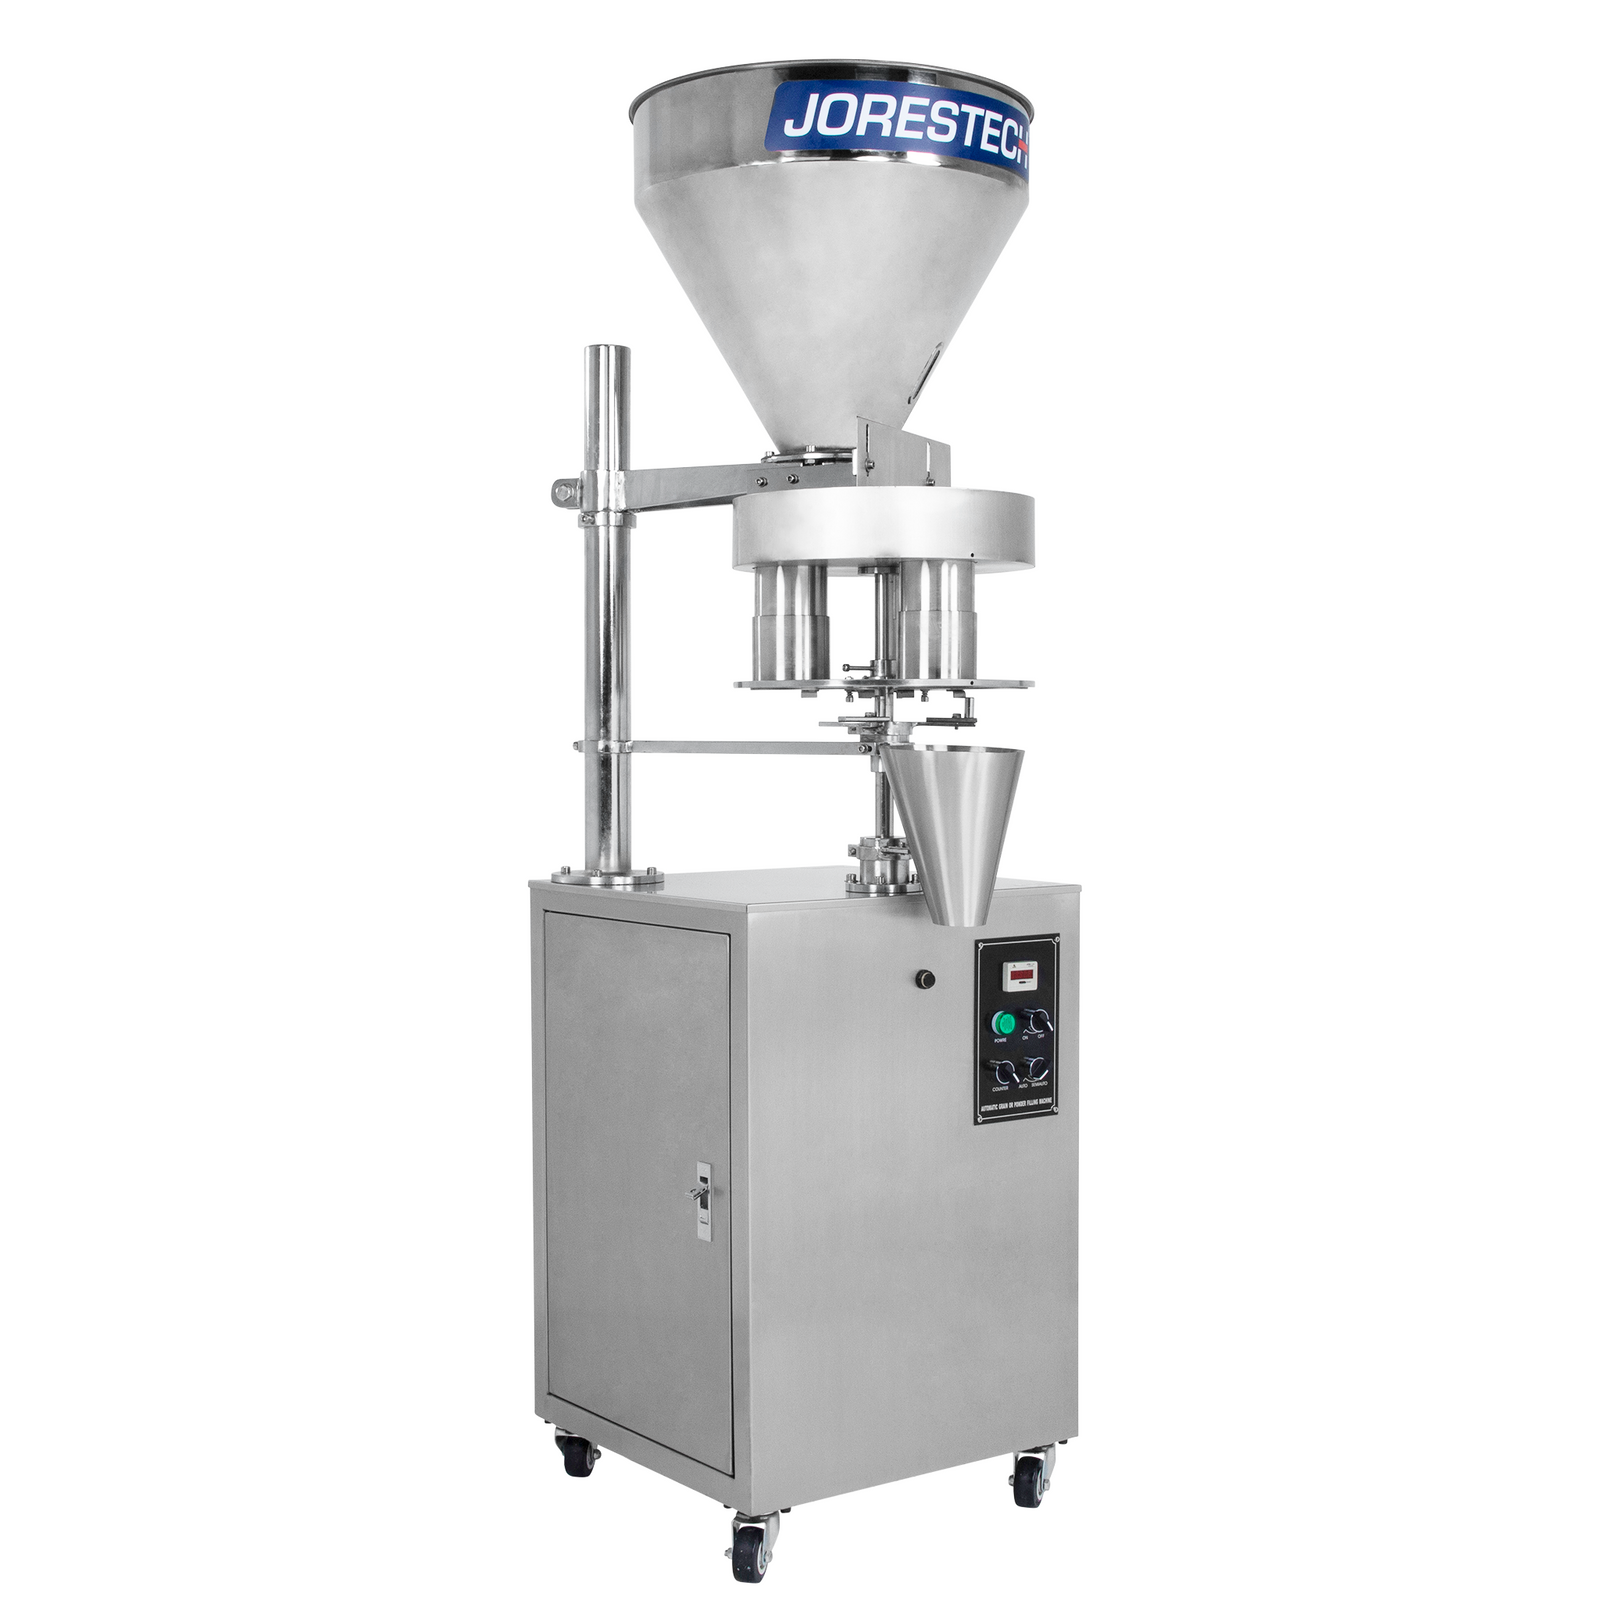 The stainless steel JORES TECHNOLOGIES® semi automatic volumetric filler for free-flowing granular products in a diagonal view over